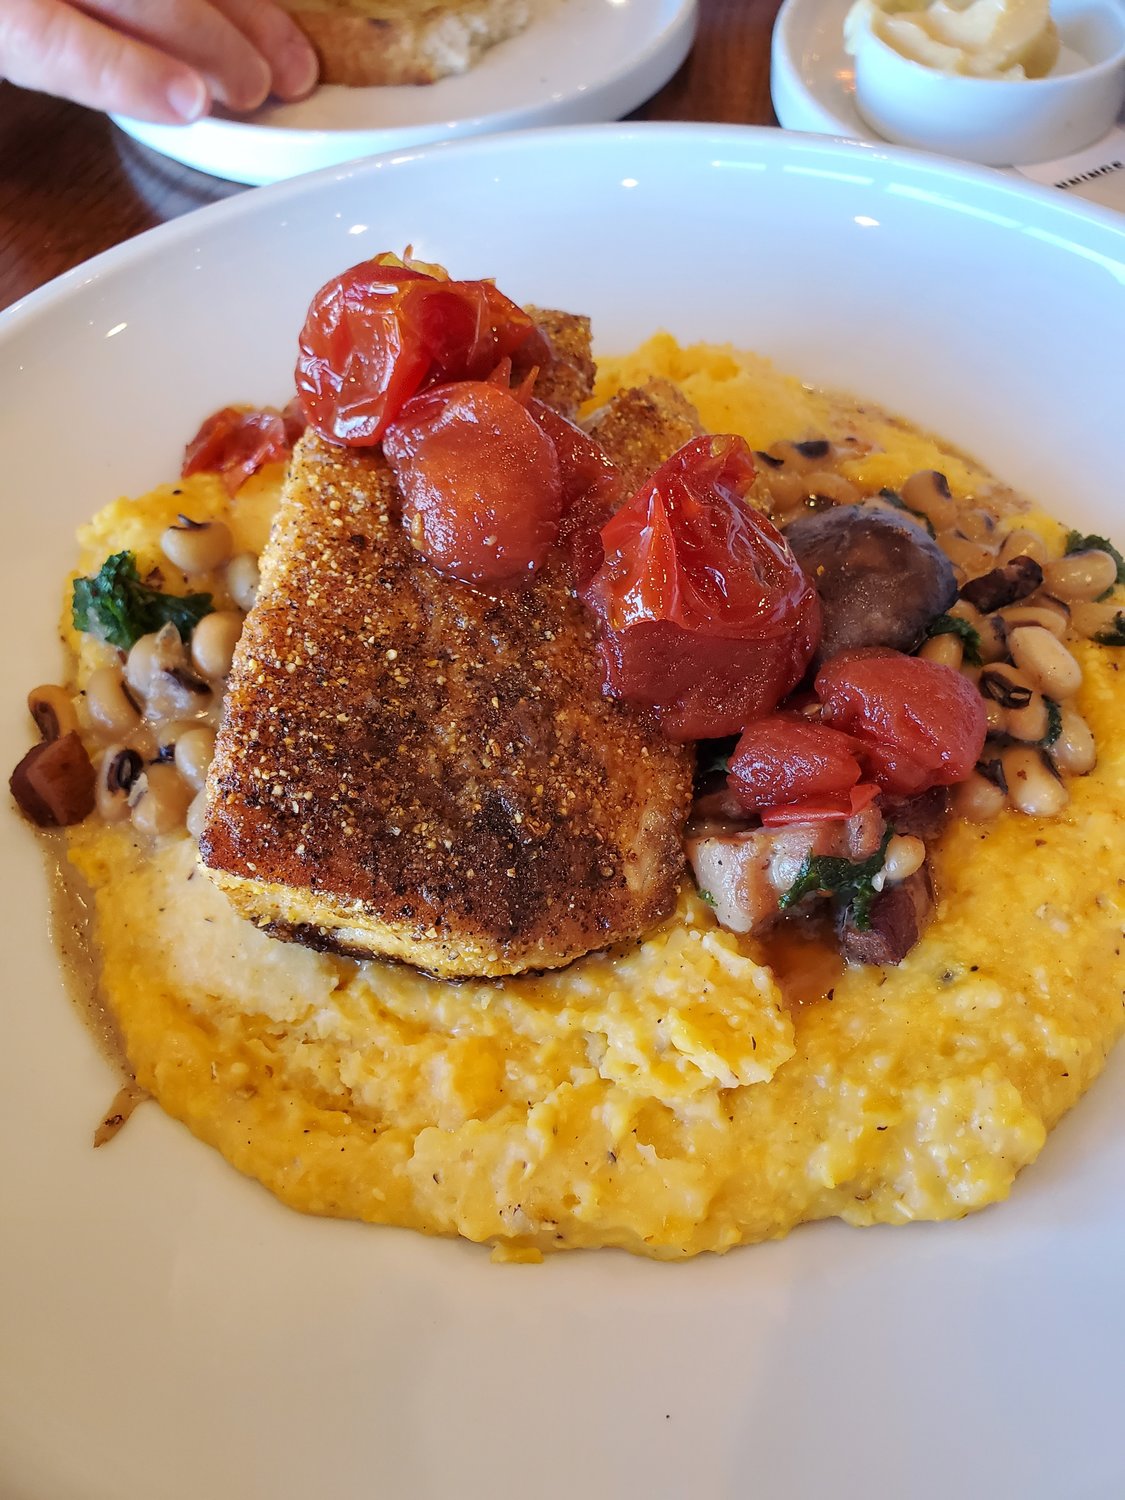 Fish fans will love the cornmeal-fried red fish surrounded by Logan Turnpike Mill Grits, creamy field peas with brown butter mushrooms and tomato jam.